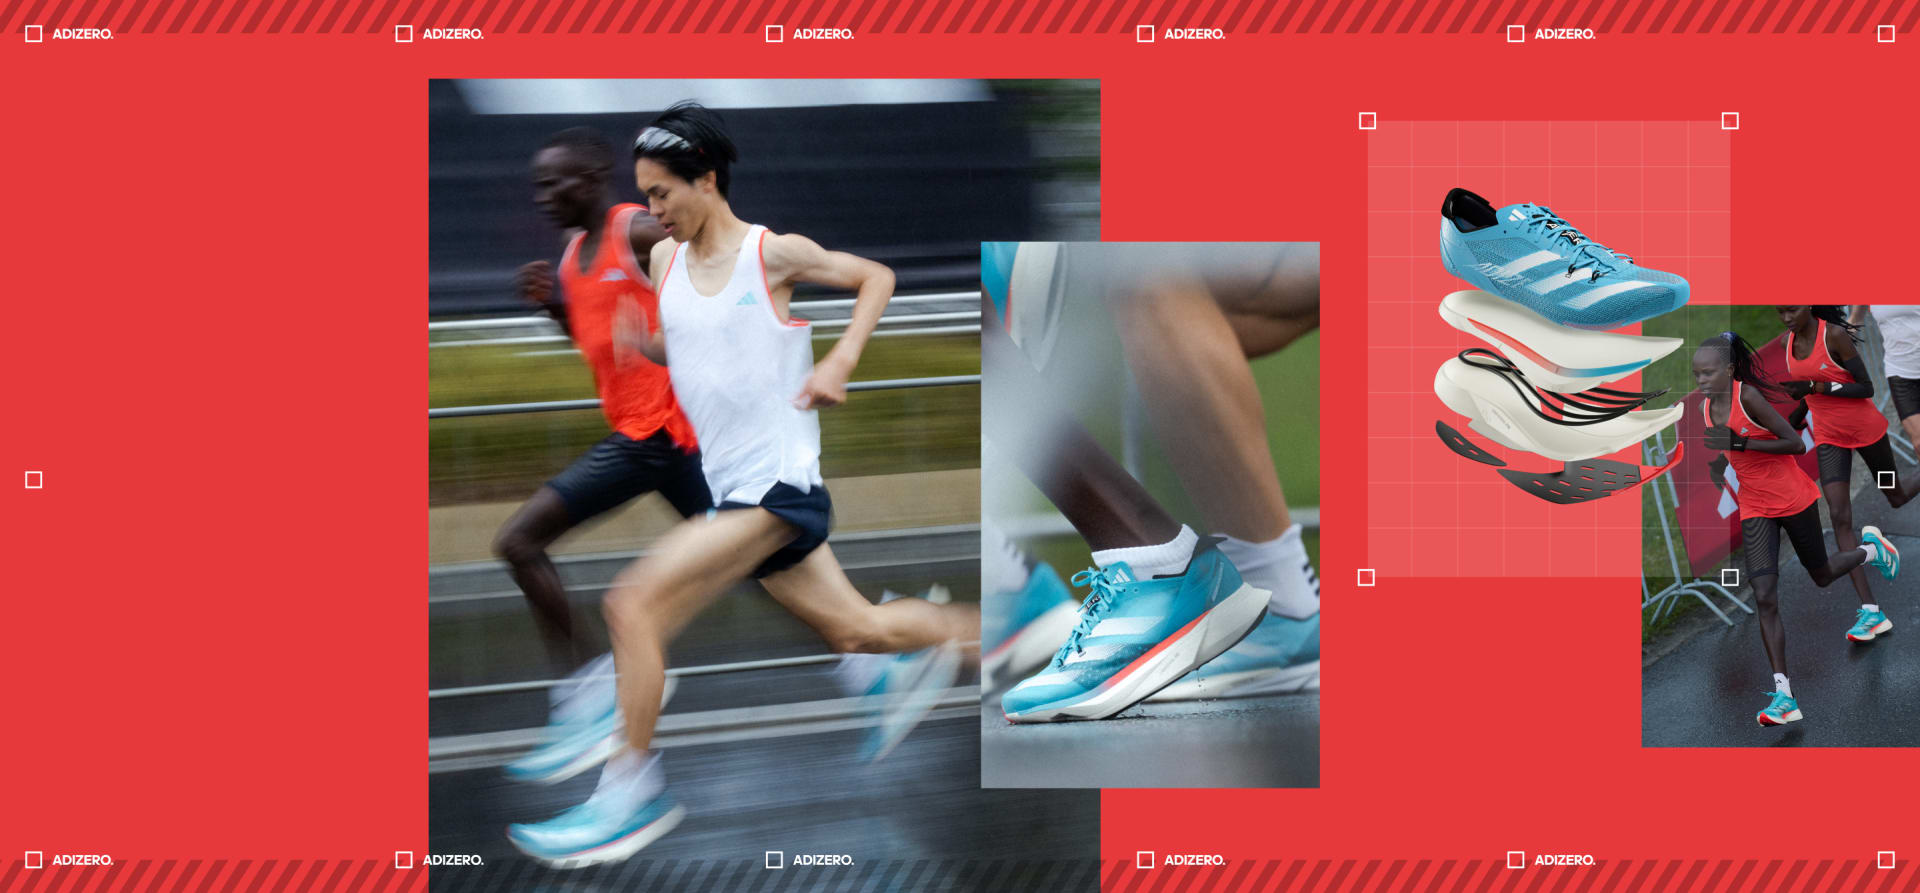 Montage of runners in motion wearing Adizero Pro 3, close-up on running shoe, cross-section of the layers of foam in Adizero Pro 3, Peres Jepchirchir wearing Adizero while racing.